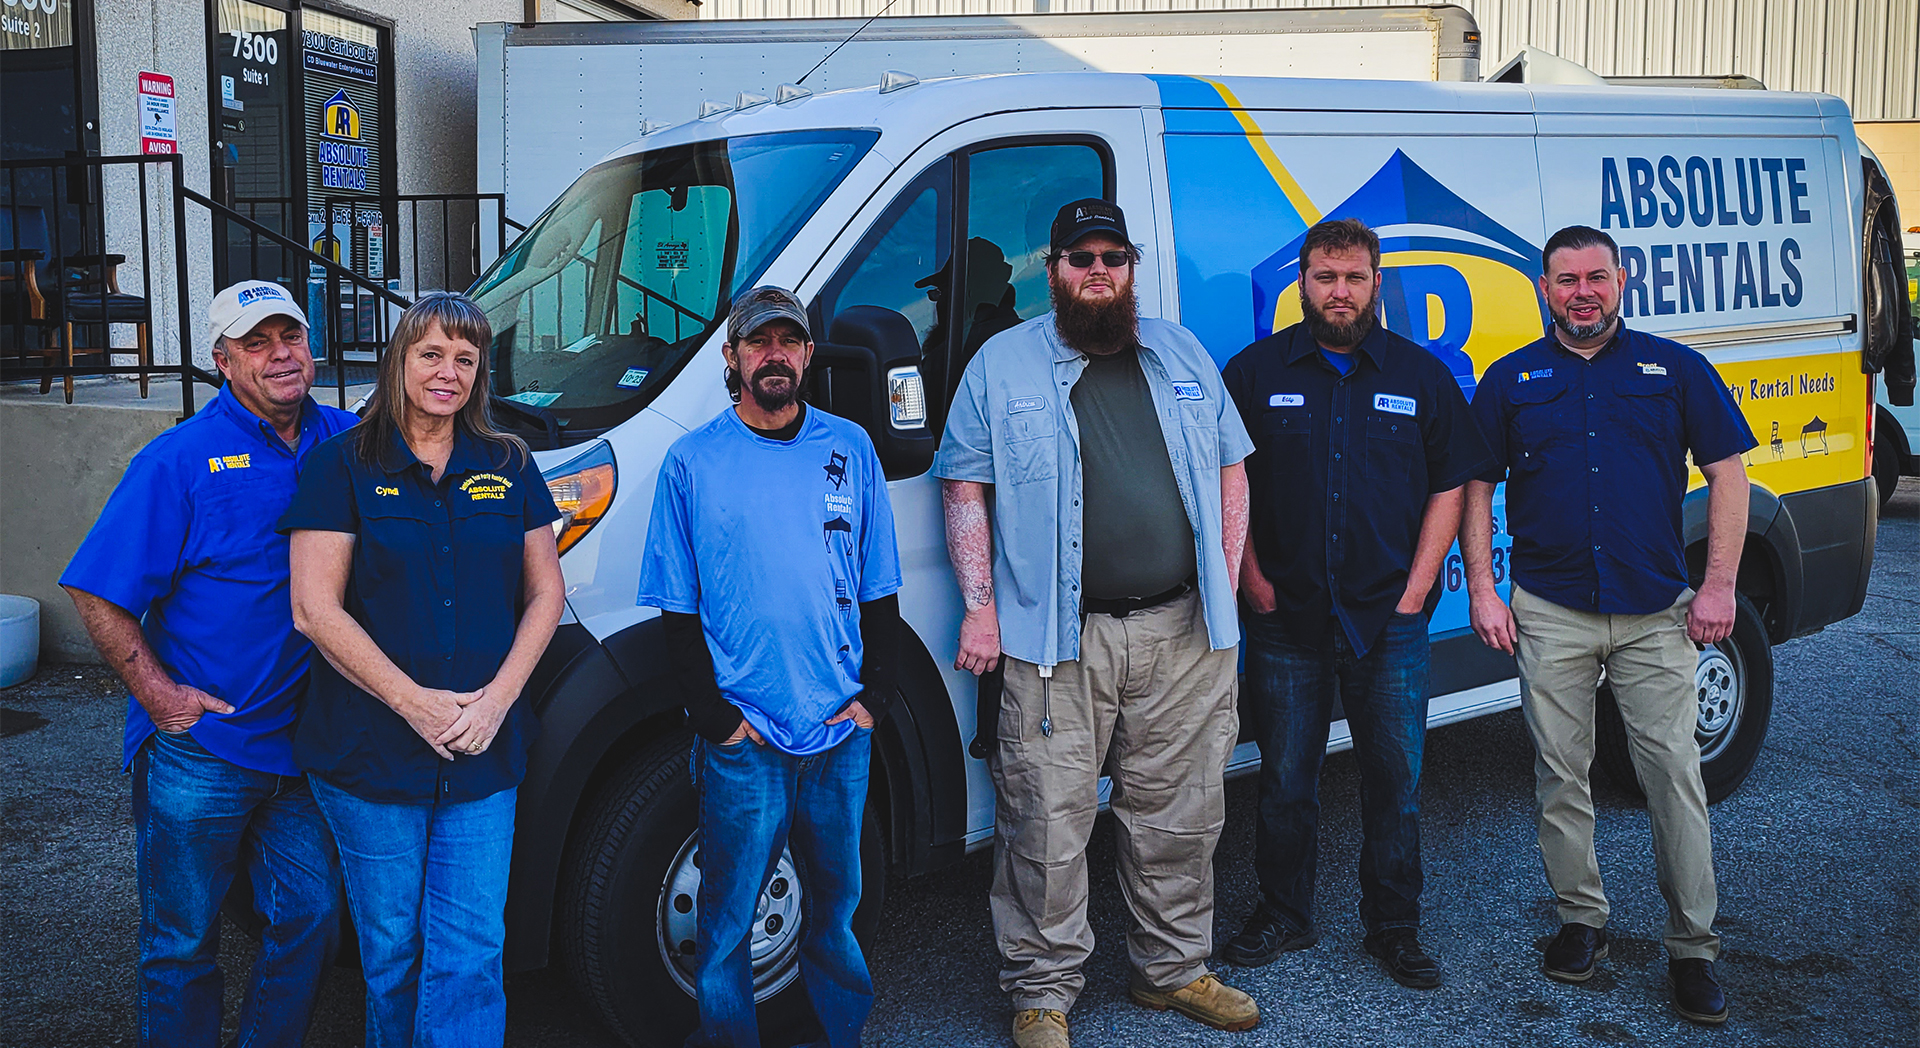 The All-Star Team for planning, delivery and pick-up from Absolute Rentals.